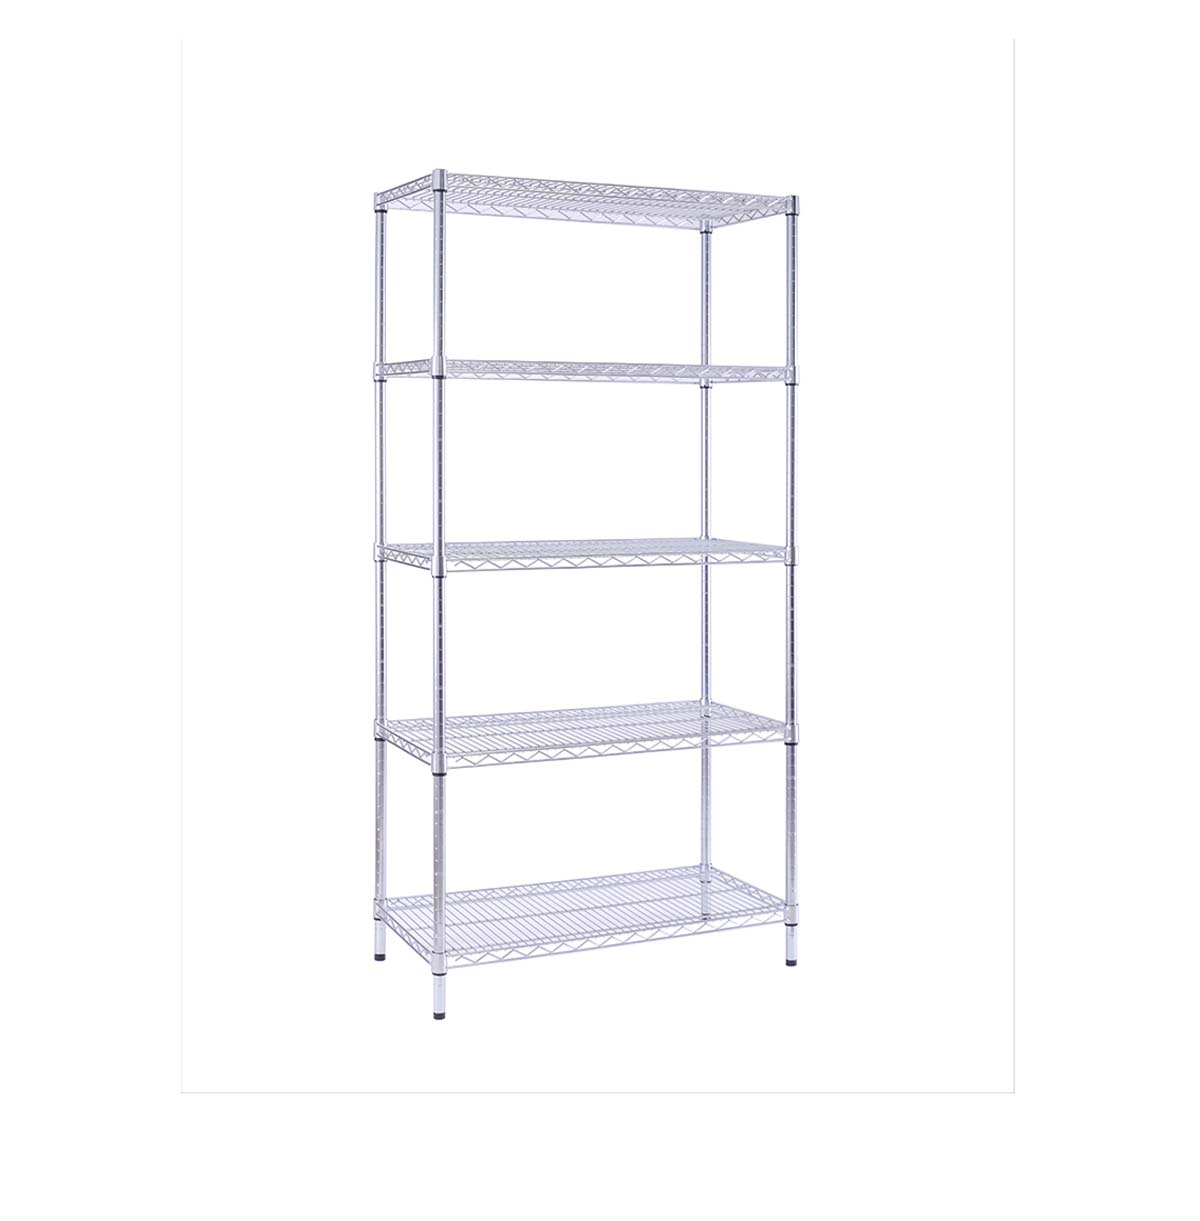 stainless steel table with wire shelf.Shelf safety and industry standards and regulations